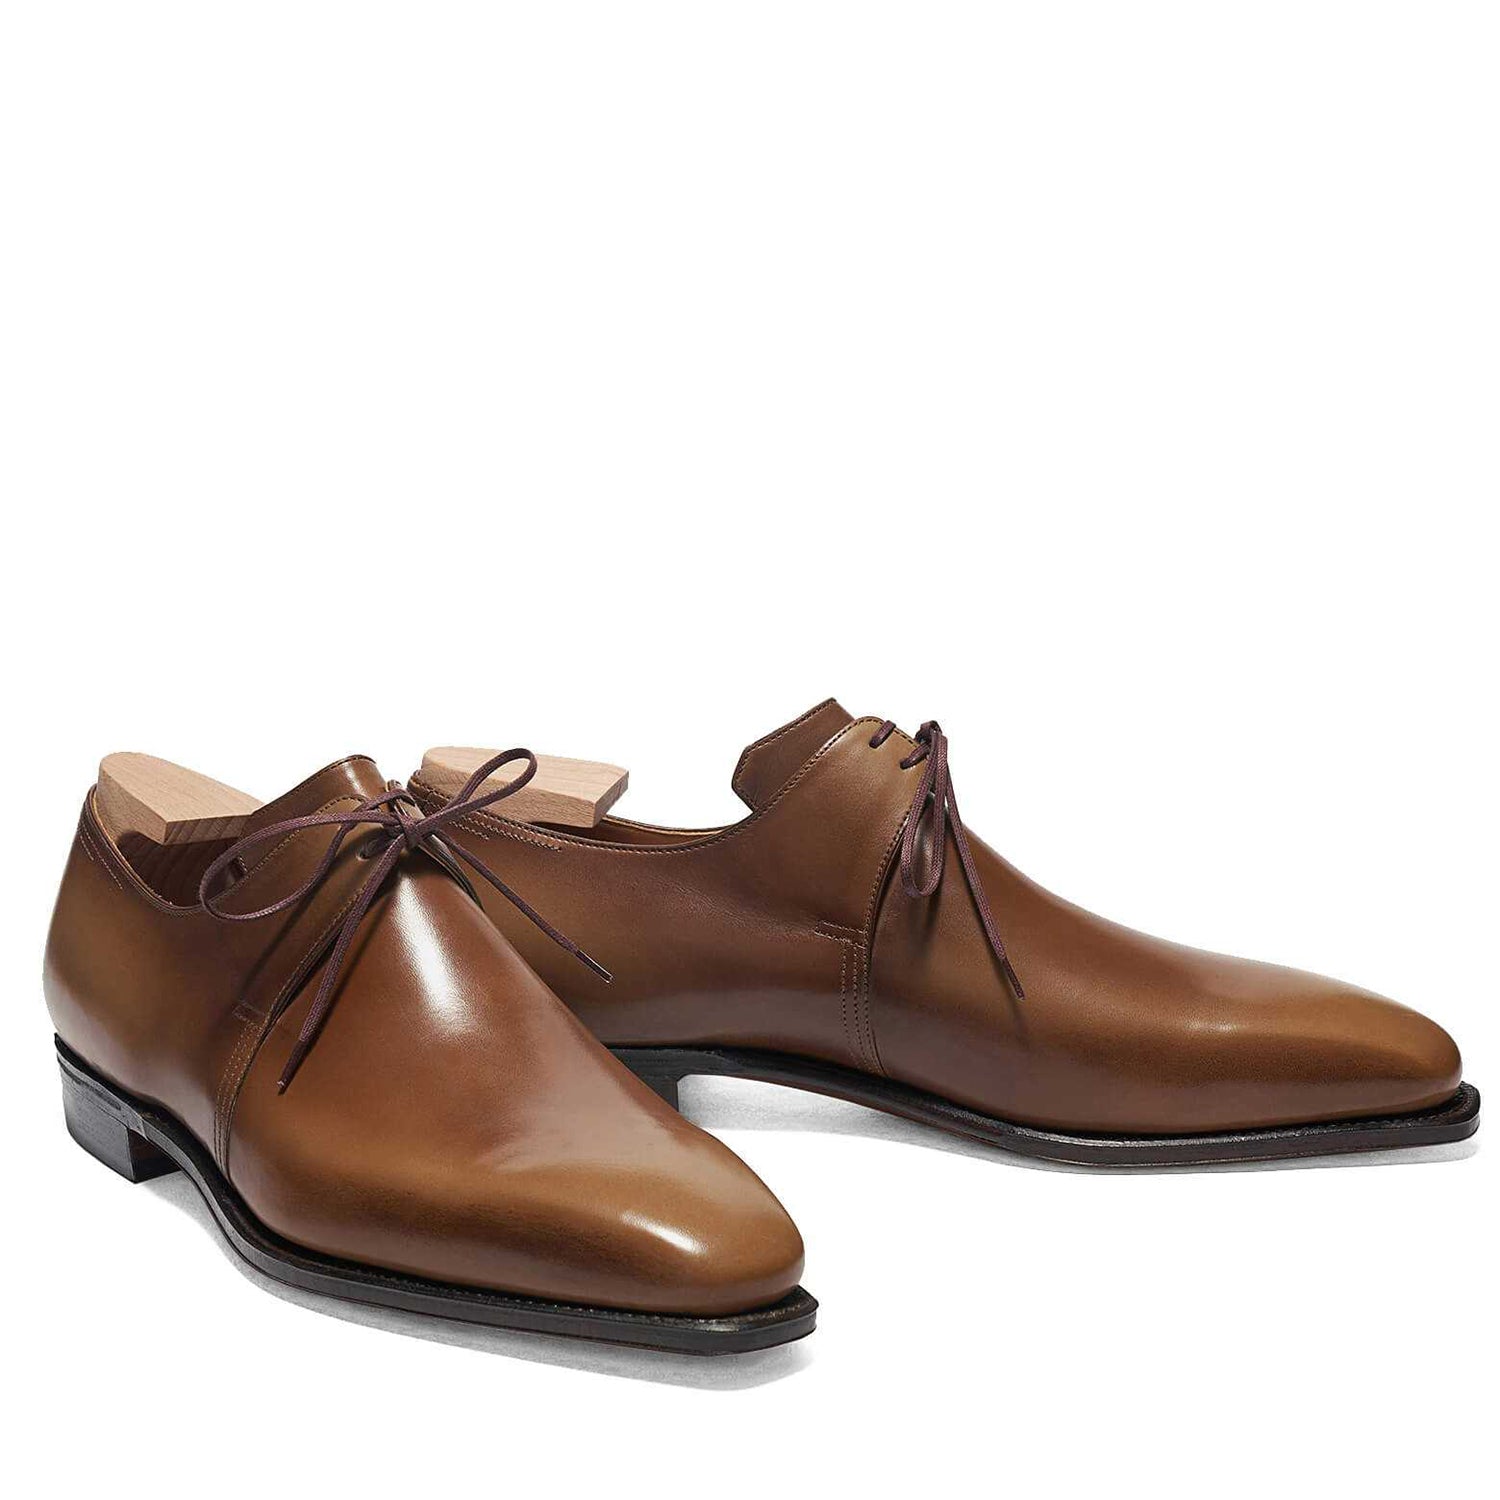 Old Wood Calf Leather Shoes